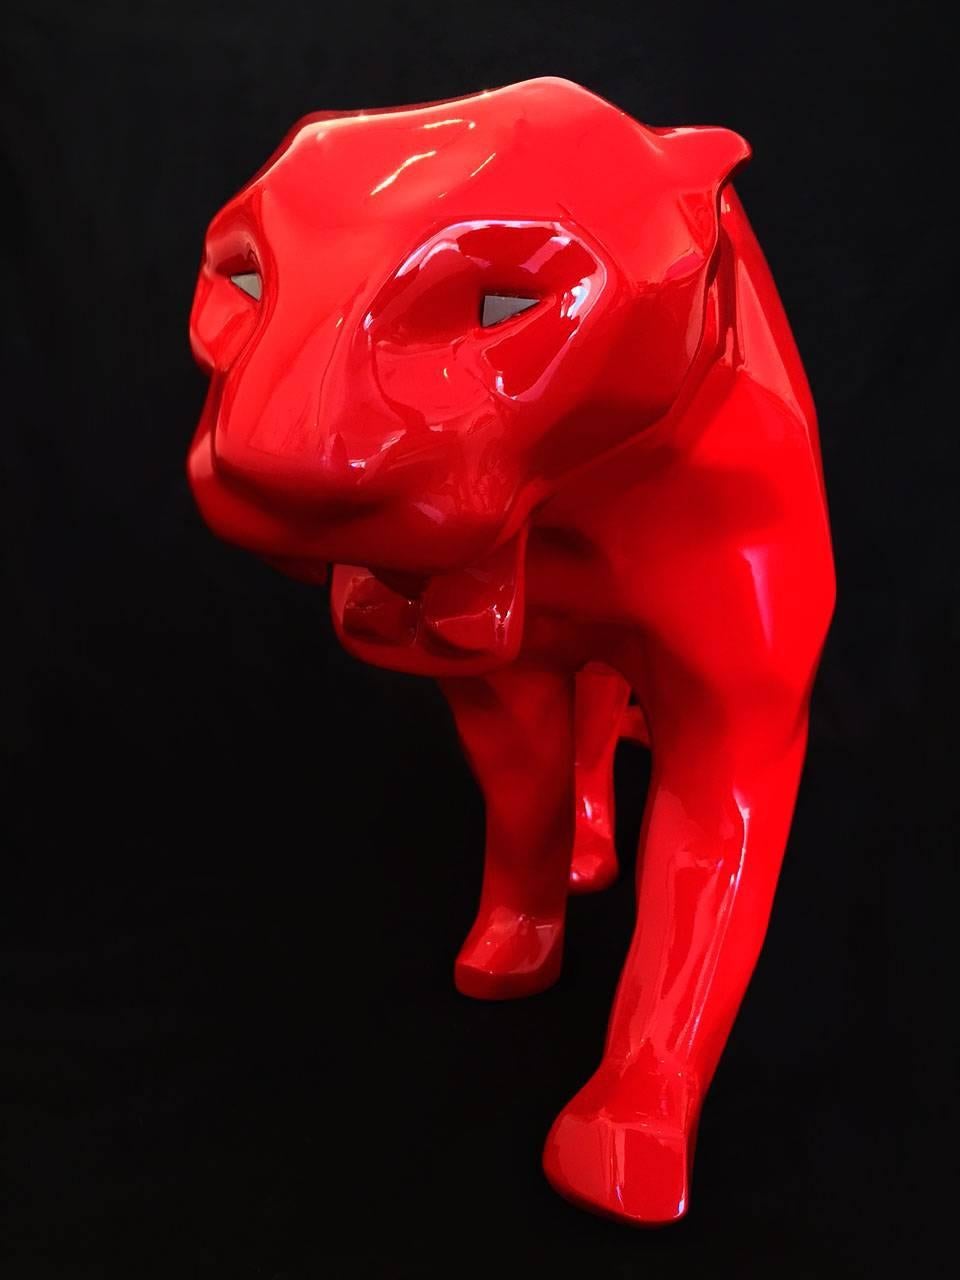 Original Richard Orlinski red panther sculpture made of resin with a white glaze finish. From the limited edition of 8 signed and numbered.